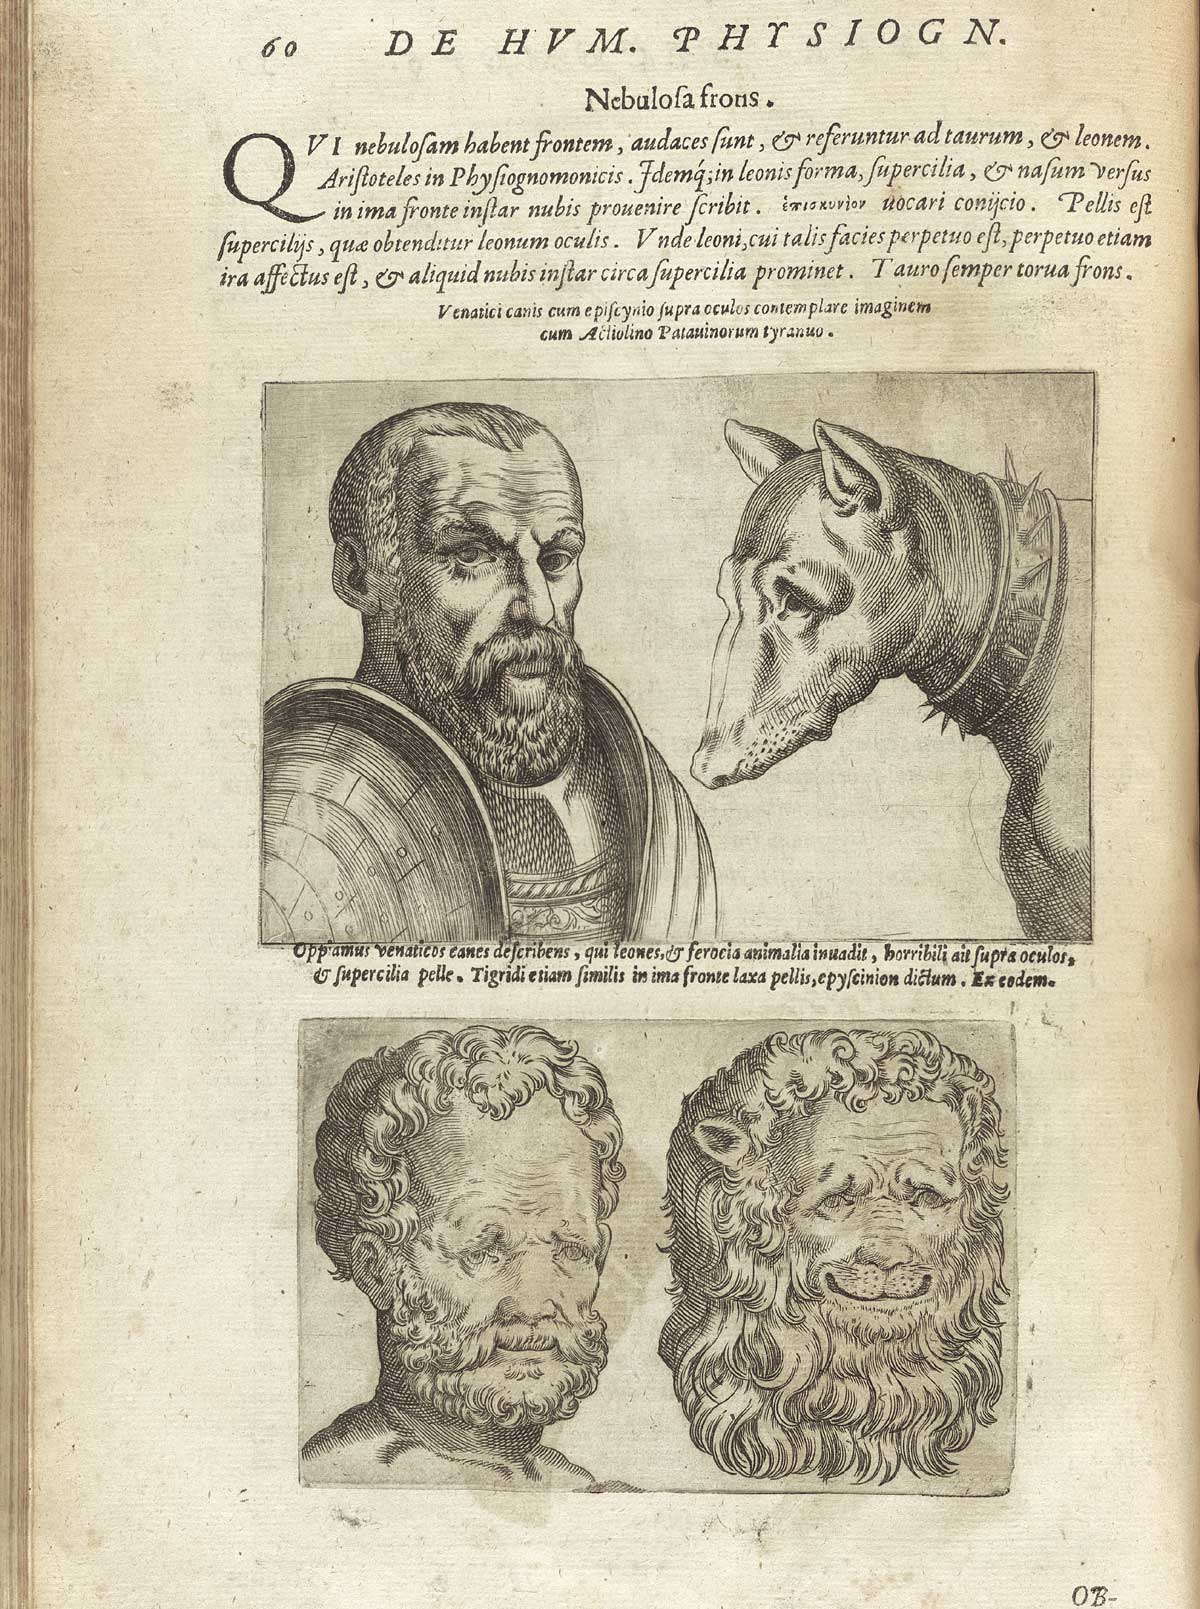 Page 60 of Giambattista della Porta's De humana physiognomonia libri IIII, featuring an upper and lower image. In the top image has the head and shoulders frontal view of a man in armor and the head and shoulders of a dog wearing a spiked collar facing the man. In the bottom image has the front view of a man with a beard and the front view of a lion.